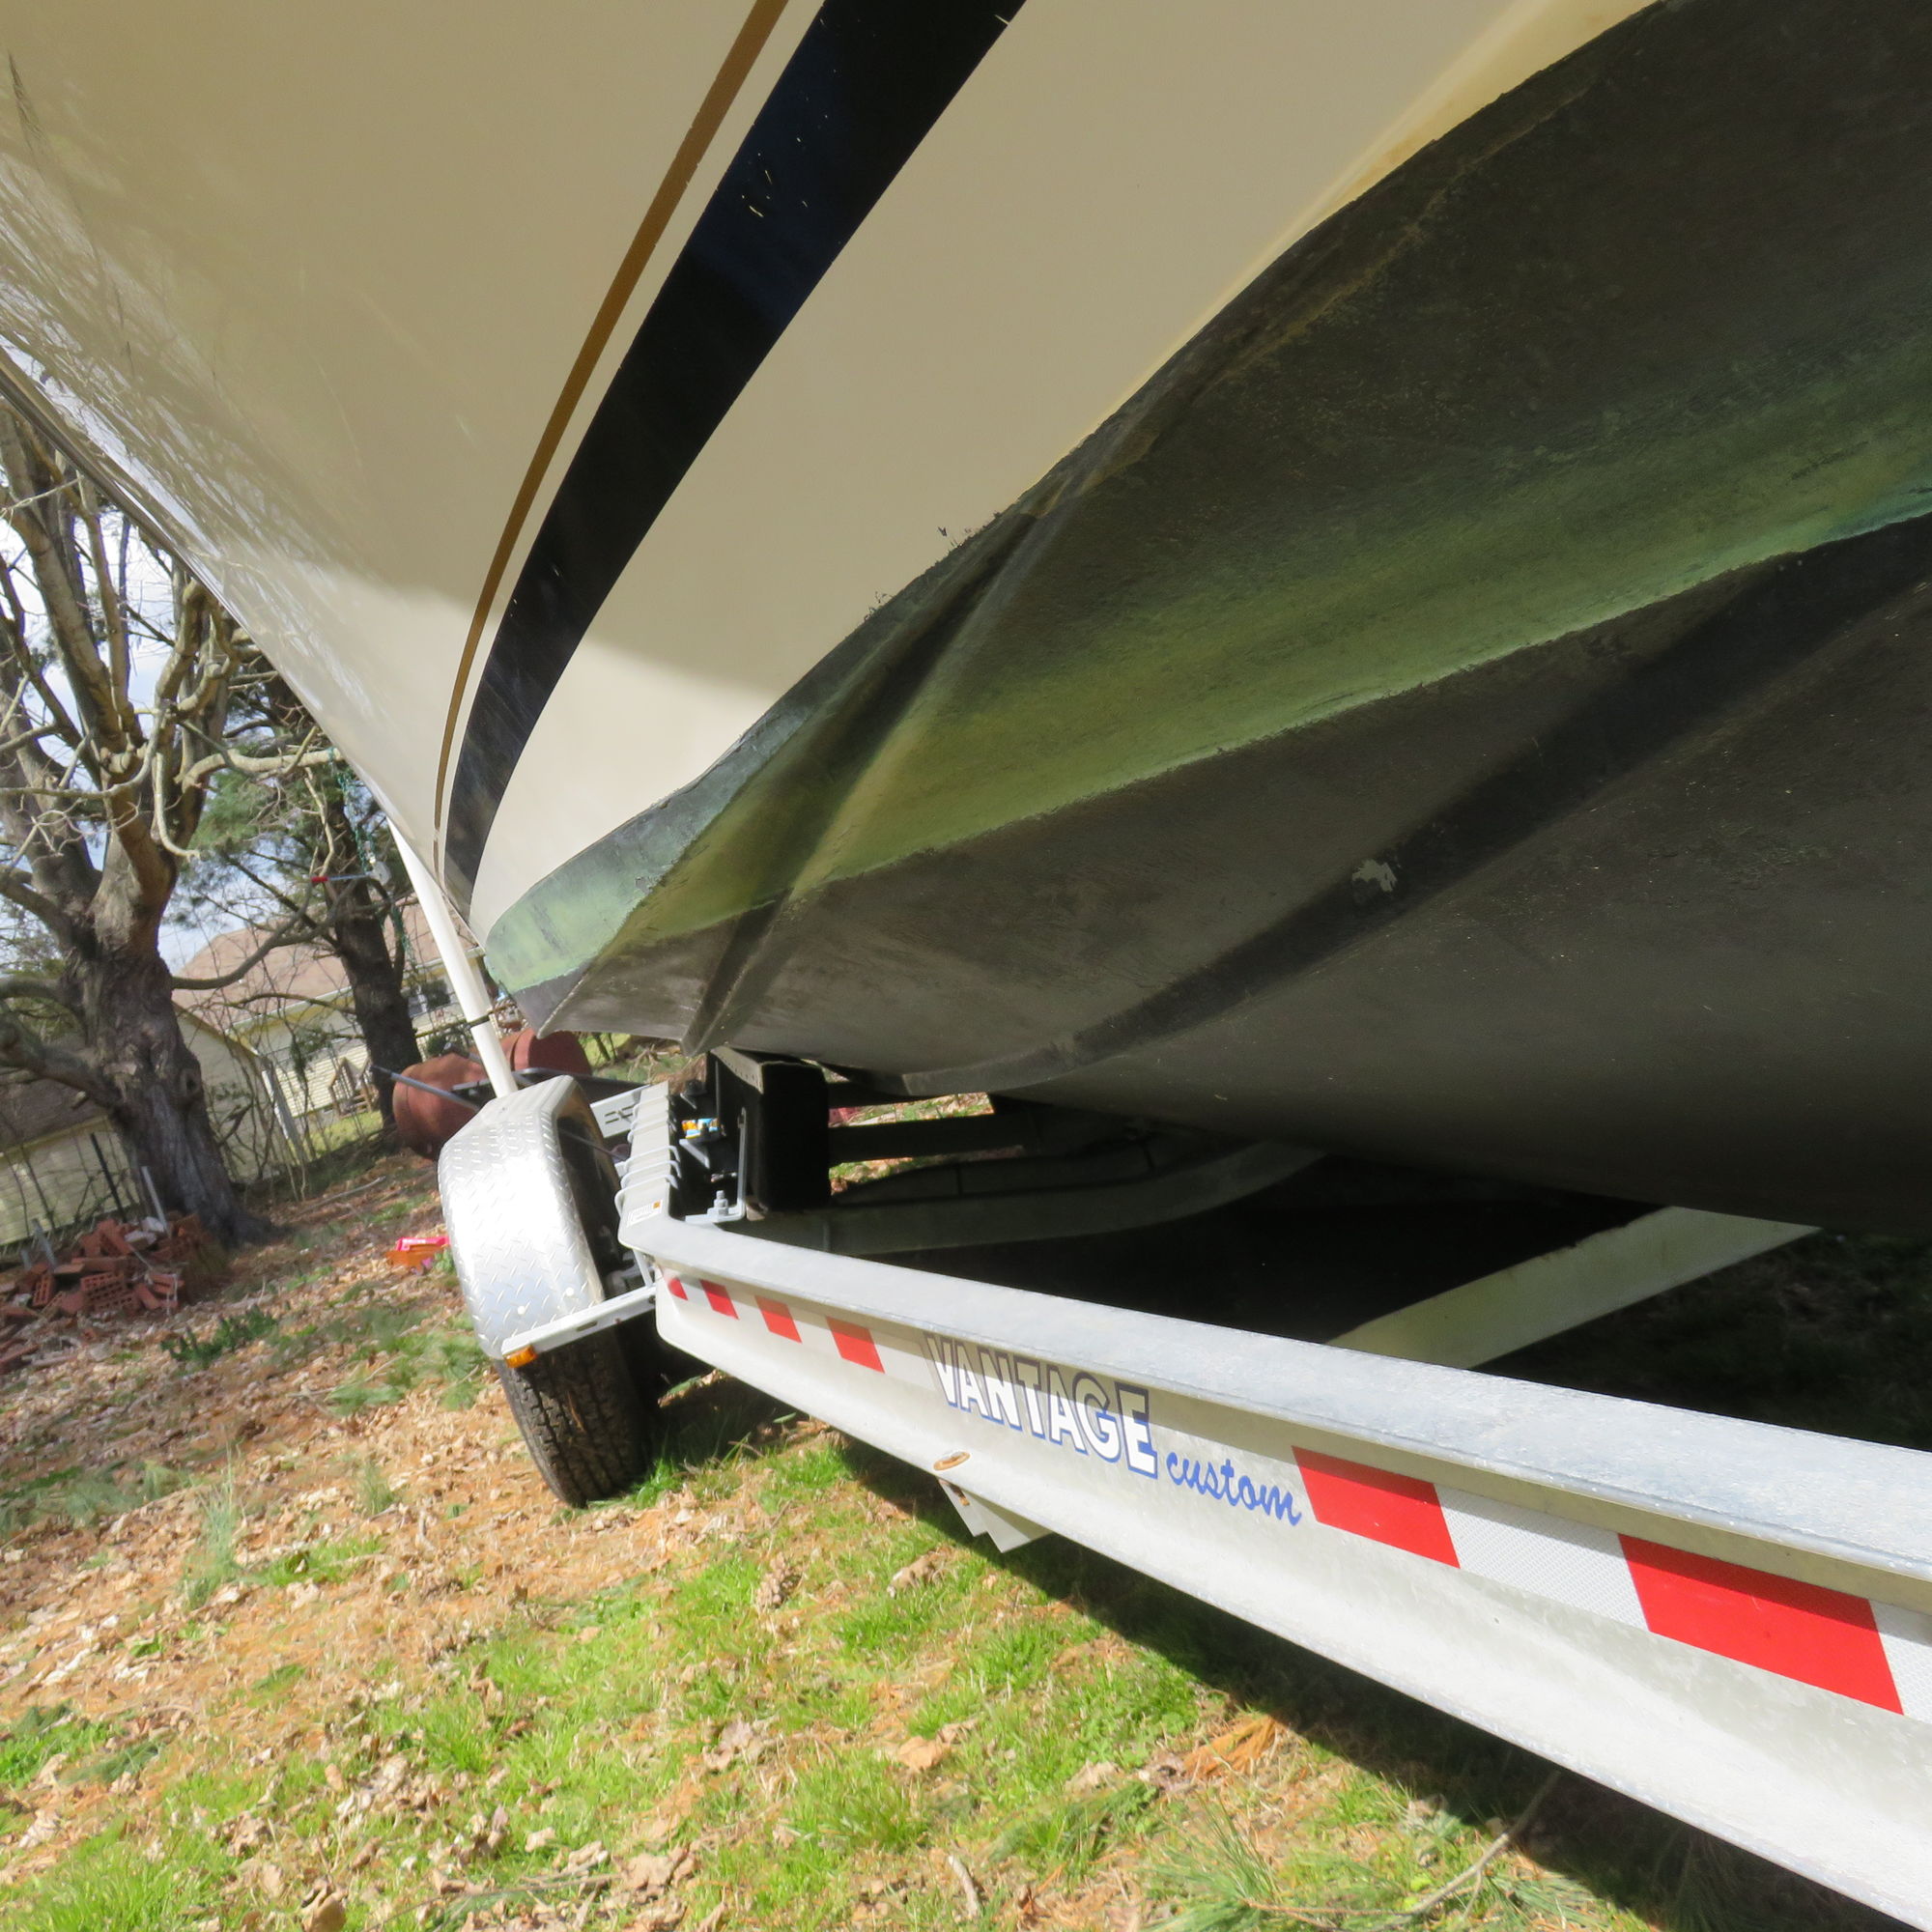 Bottom Fouled enough to slow by 4-5knt? - The Hull Truth - Boating